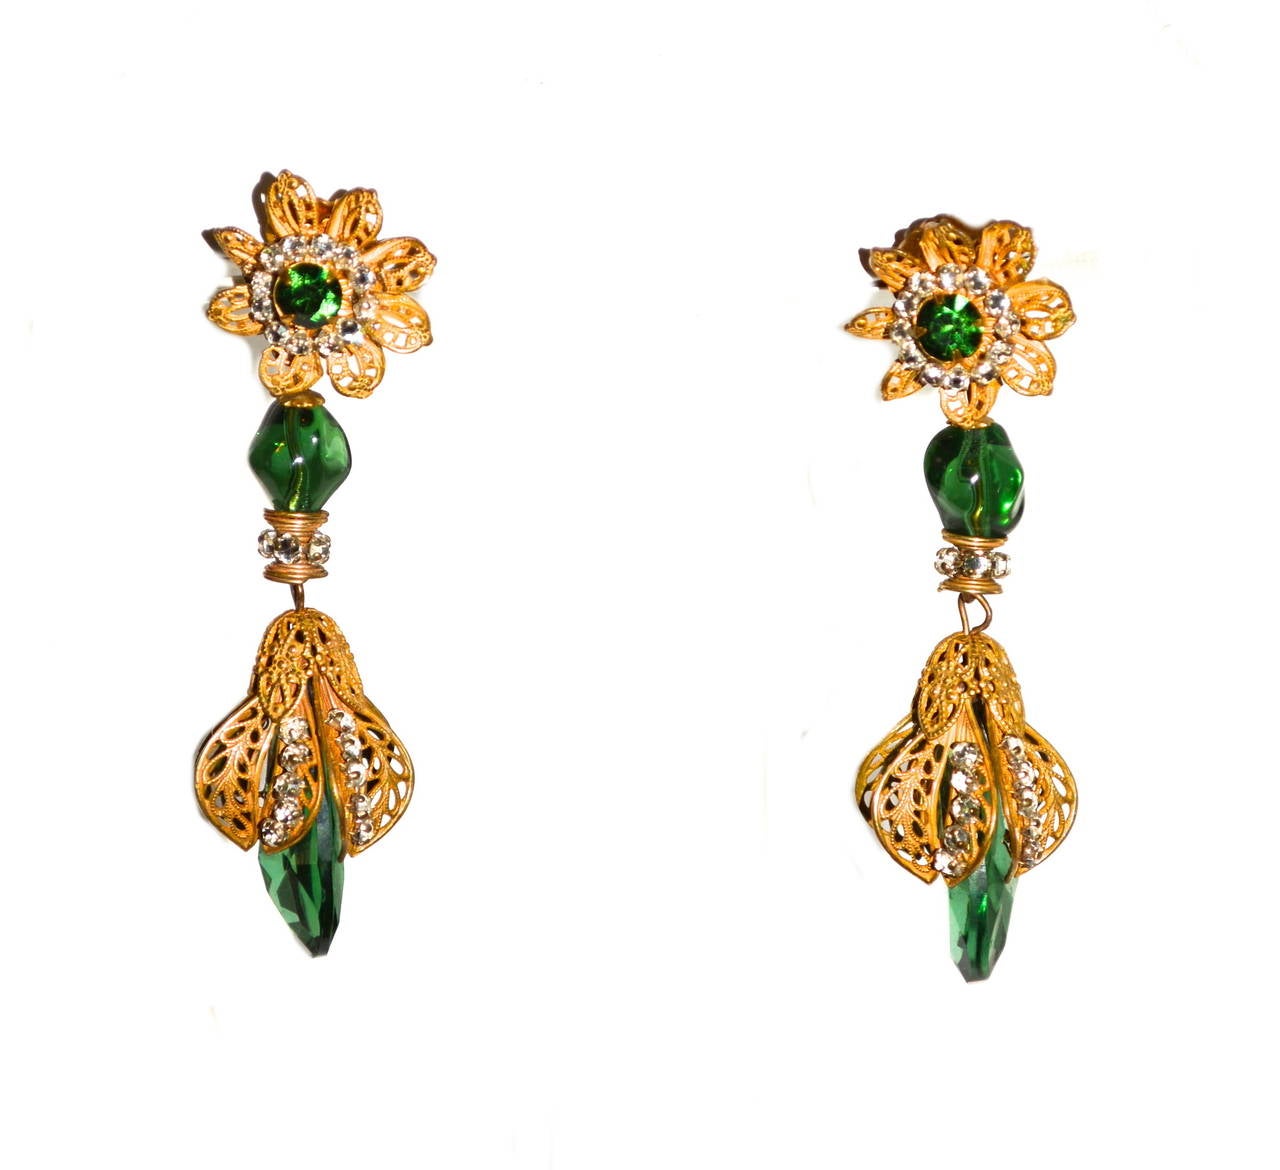 1940s-50s gorgeous green glass drop earrings with classic and iconic Miriam Haskell design elements. Width varies to 1